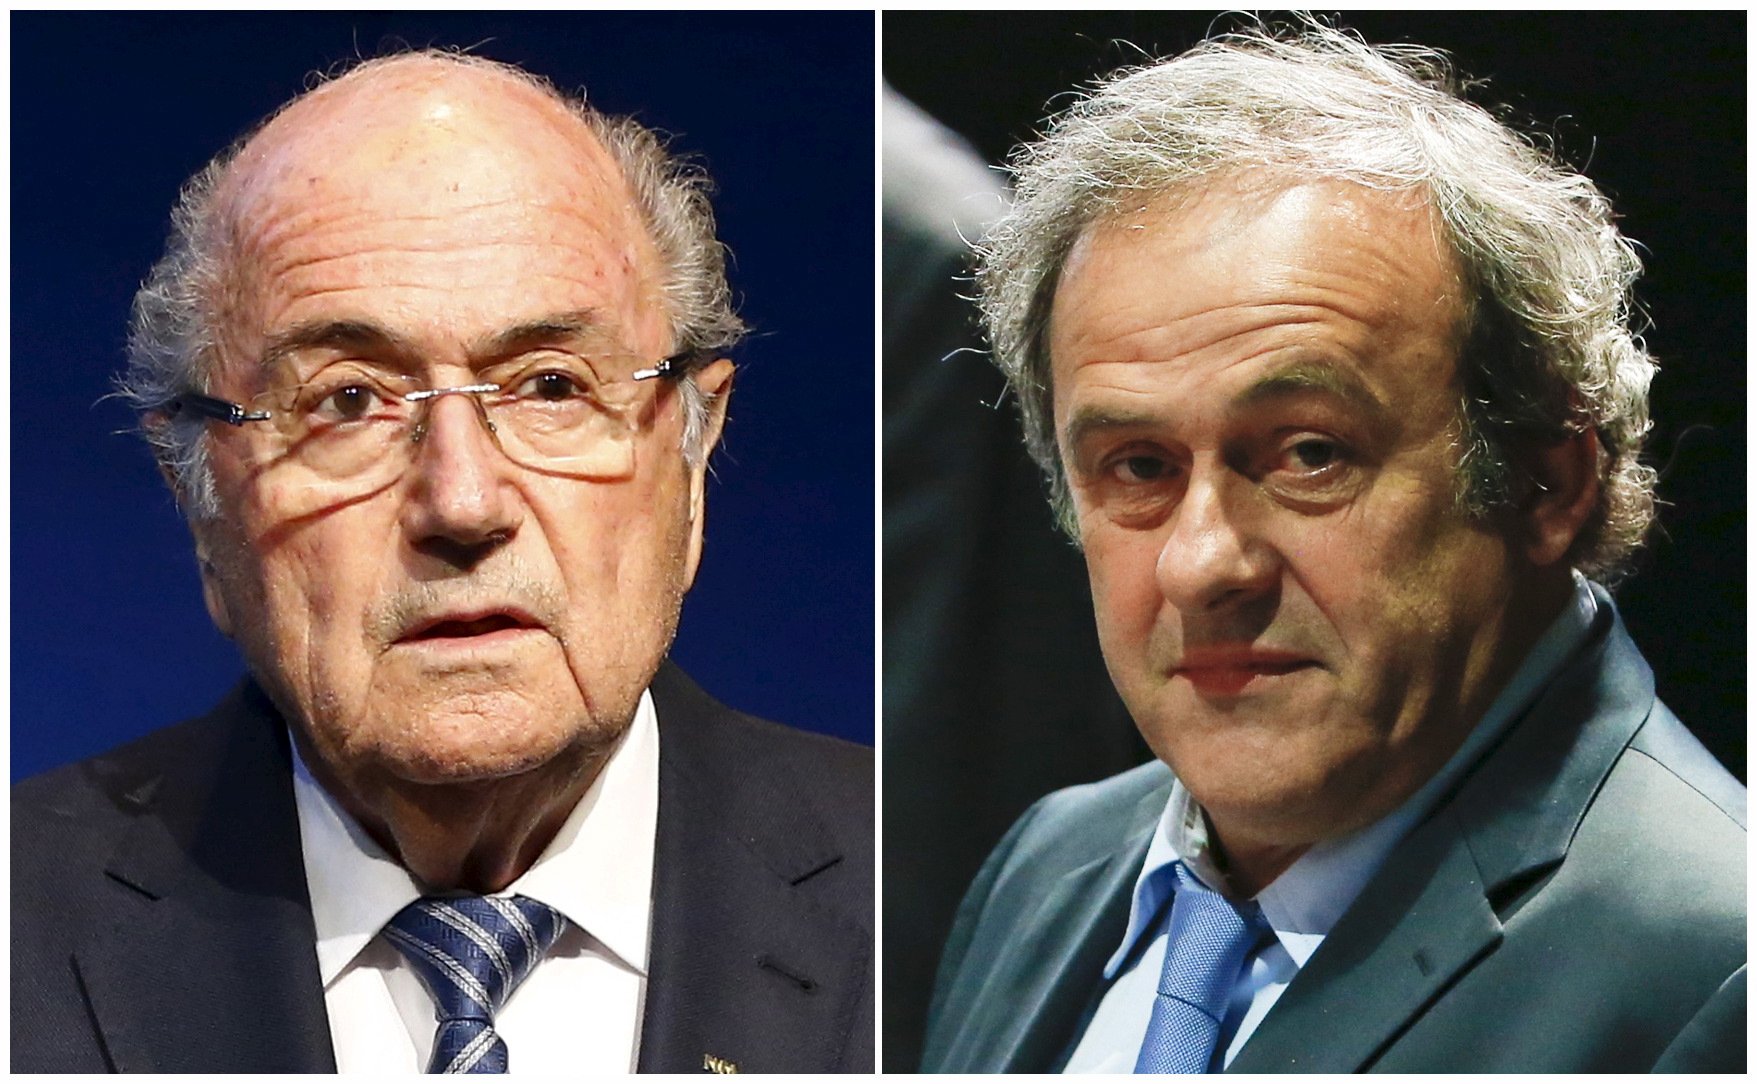 Combination file photograph of FIFA President Sepp Blatter addressing a news conference at the FIFA headquarters in Zurich, Switzerland June 2, 2015 and UEFA President Michel Platini (R) attending the 65th FIFA Congress in Zurich, Switzerland, May 29, 2015.    REUTERS/Ruben Sprich/